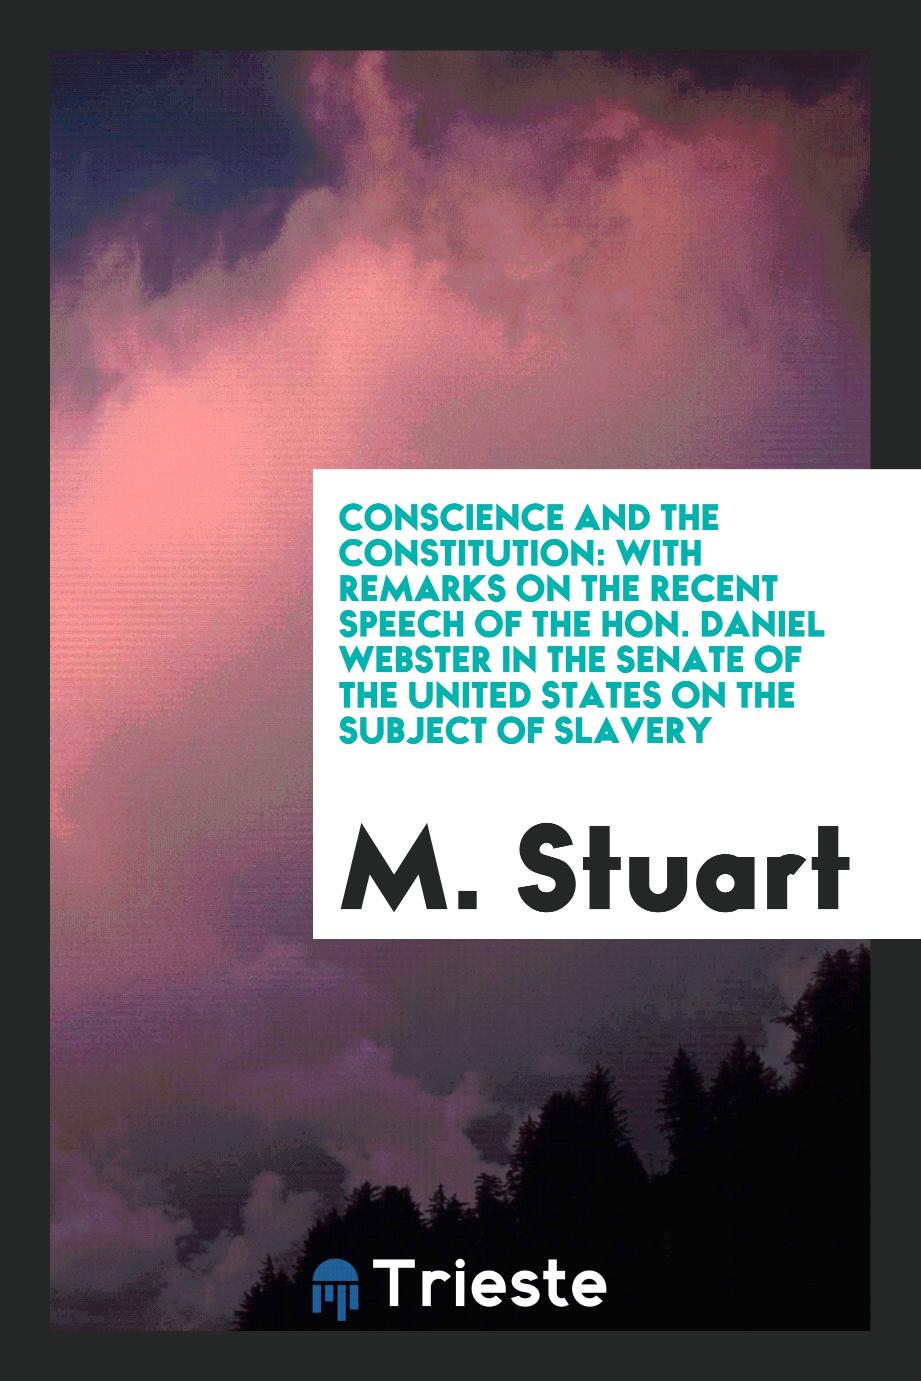 Conscience and the Constitution: With Remarks on the Recent Speech of the Hon. Daniel Webster in the Senate of the United States on the Subject of Slavery